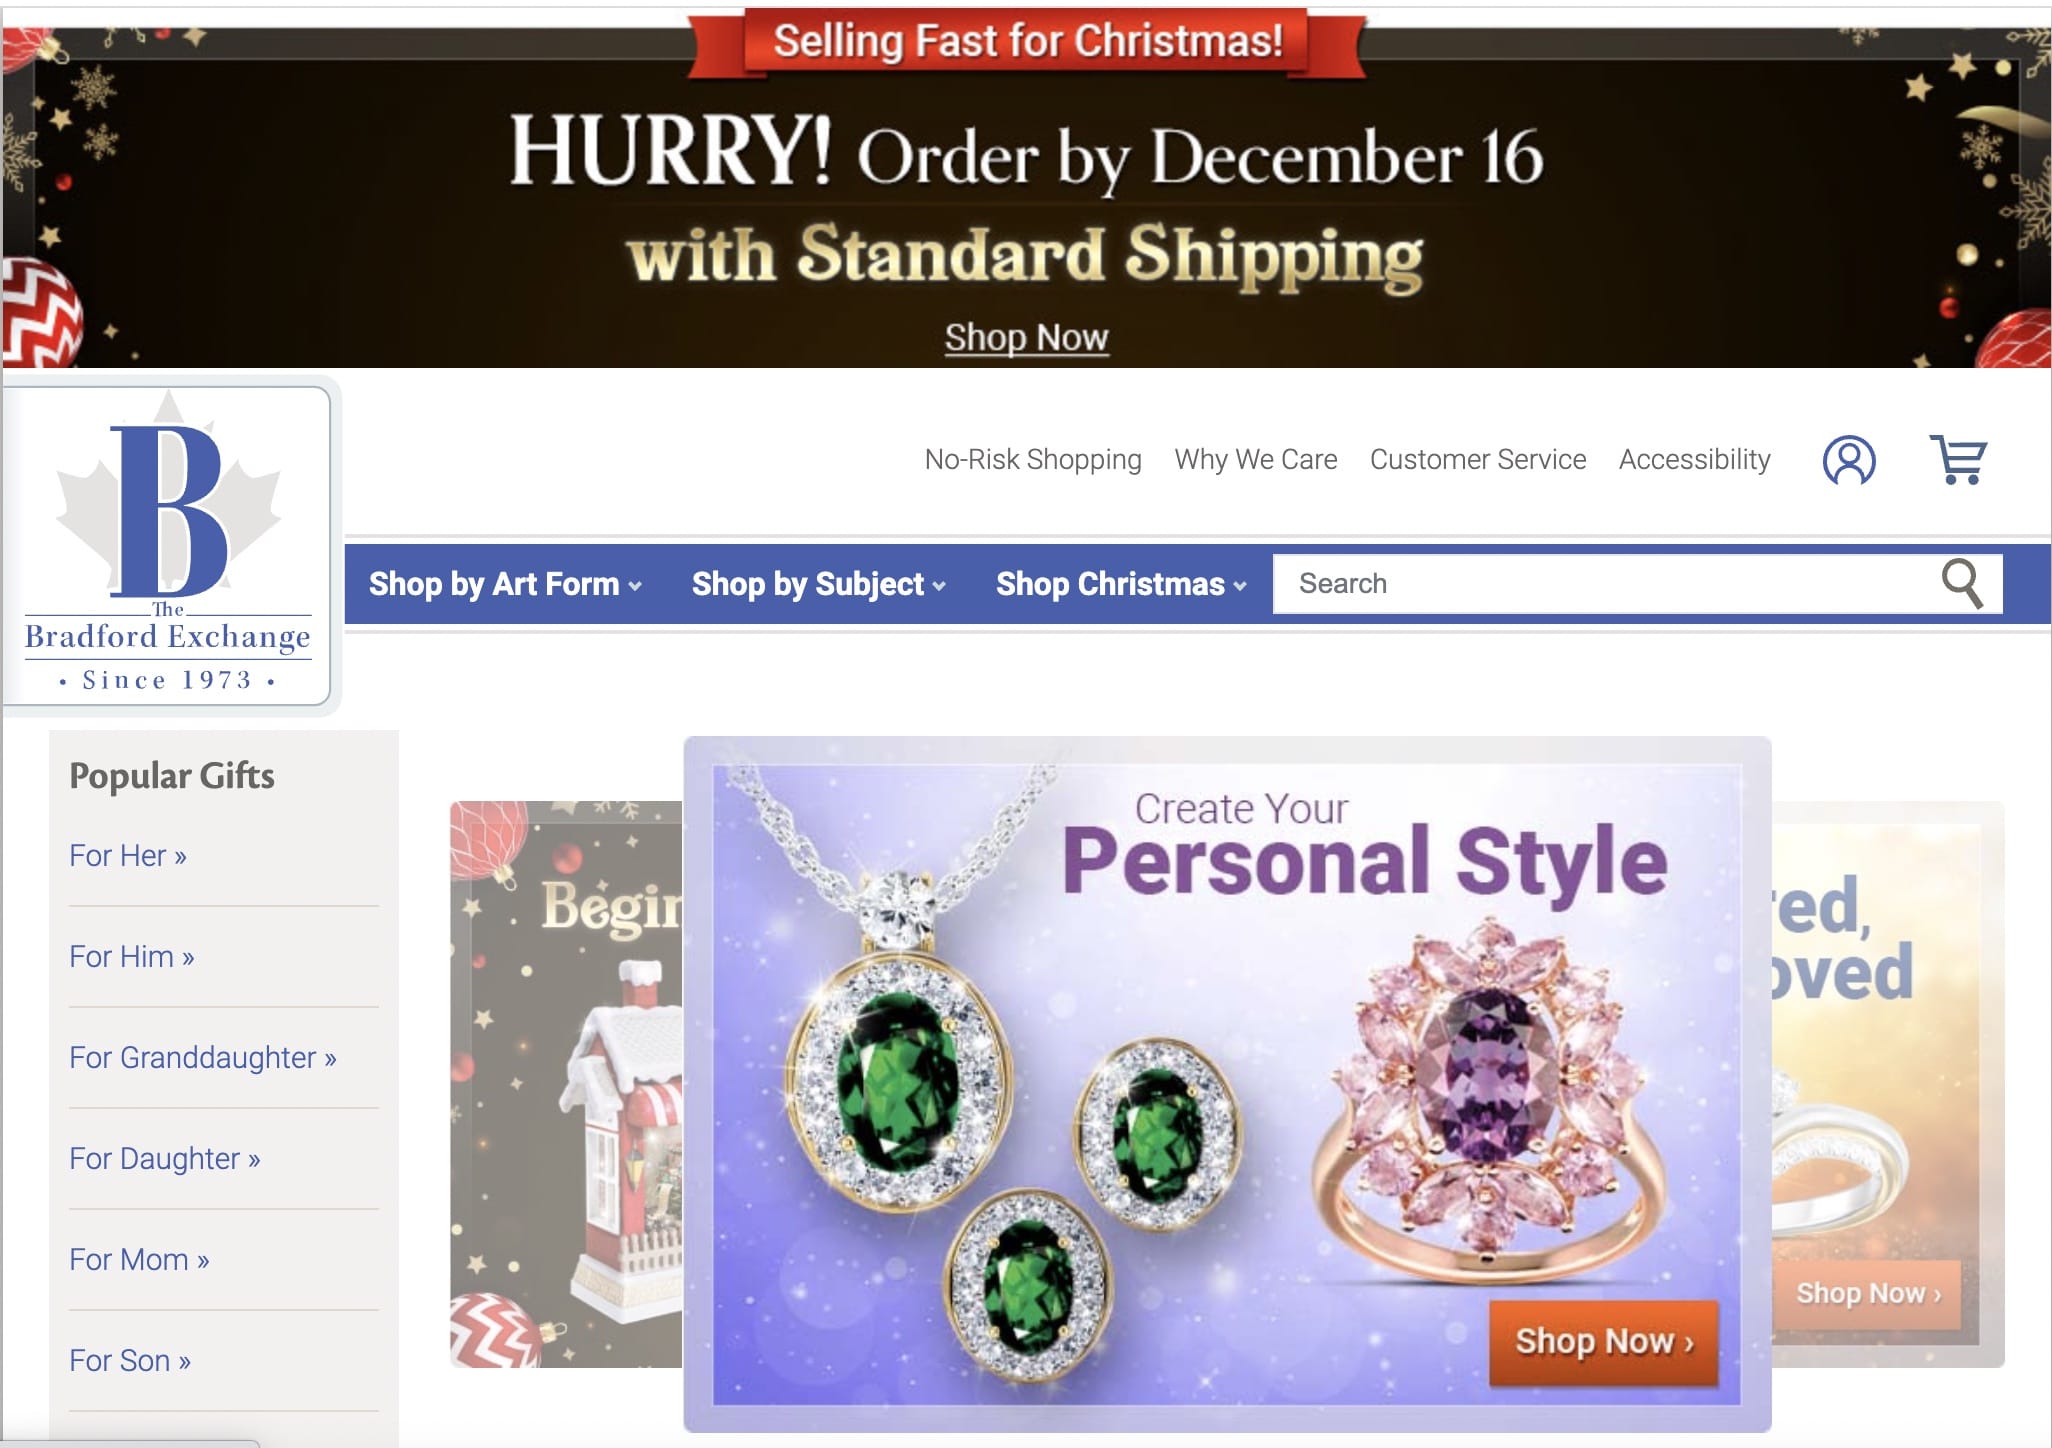 Personalized Products eCommerce: The Bradford Exchange